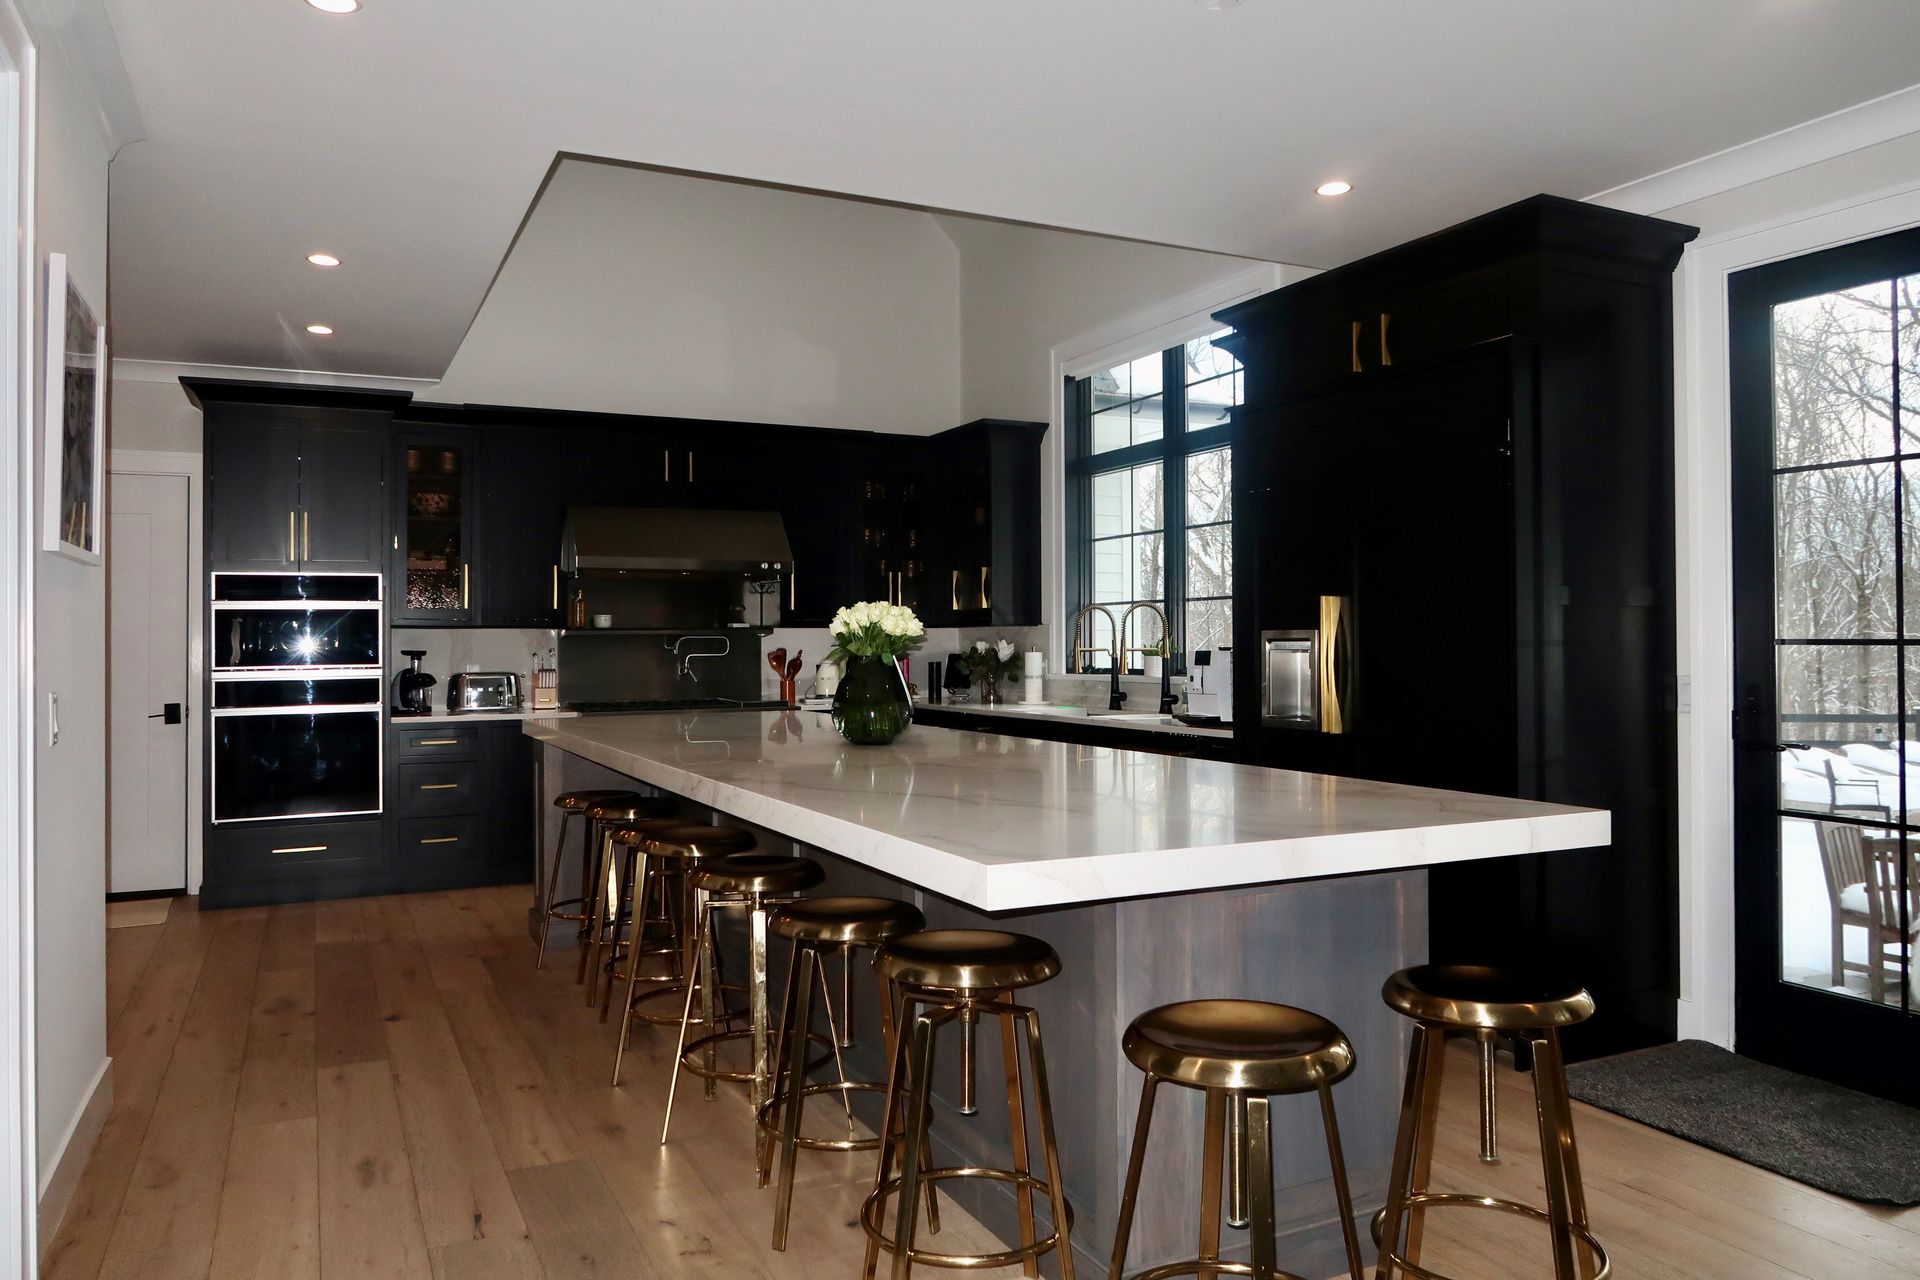 A kitchen with black cabinets and gold stools